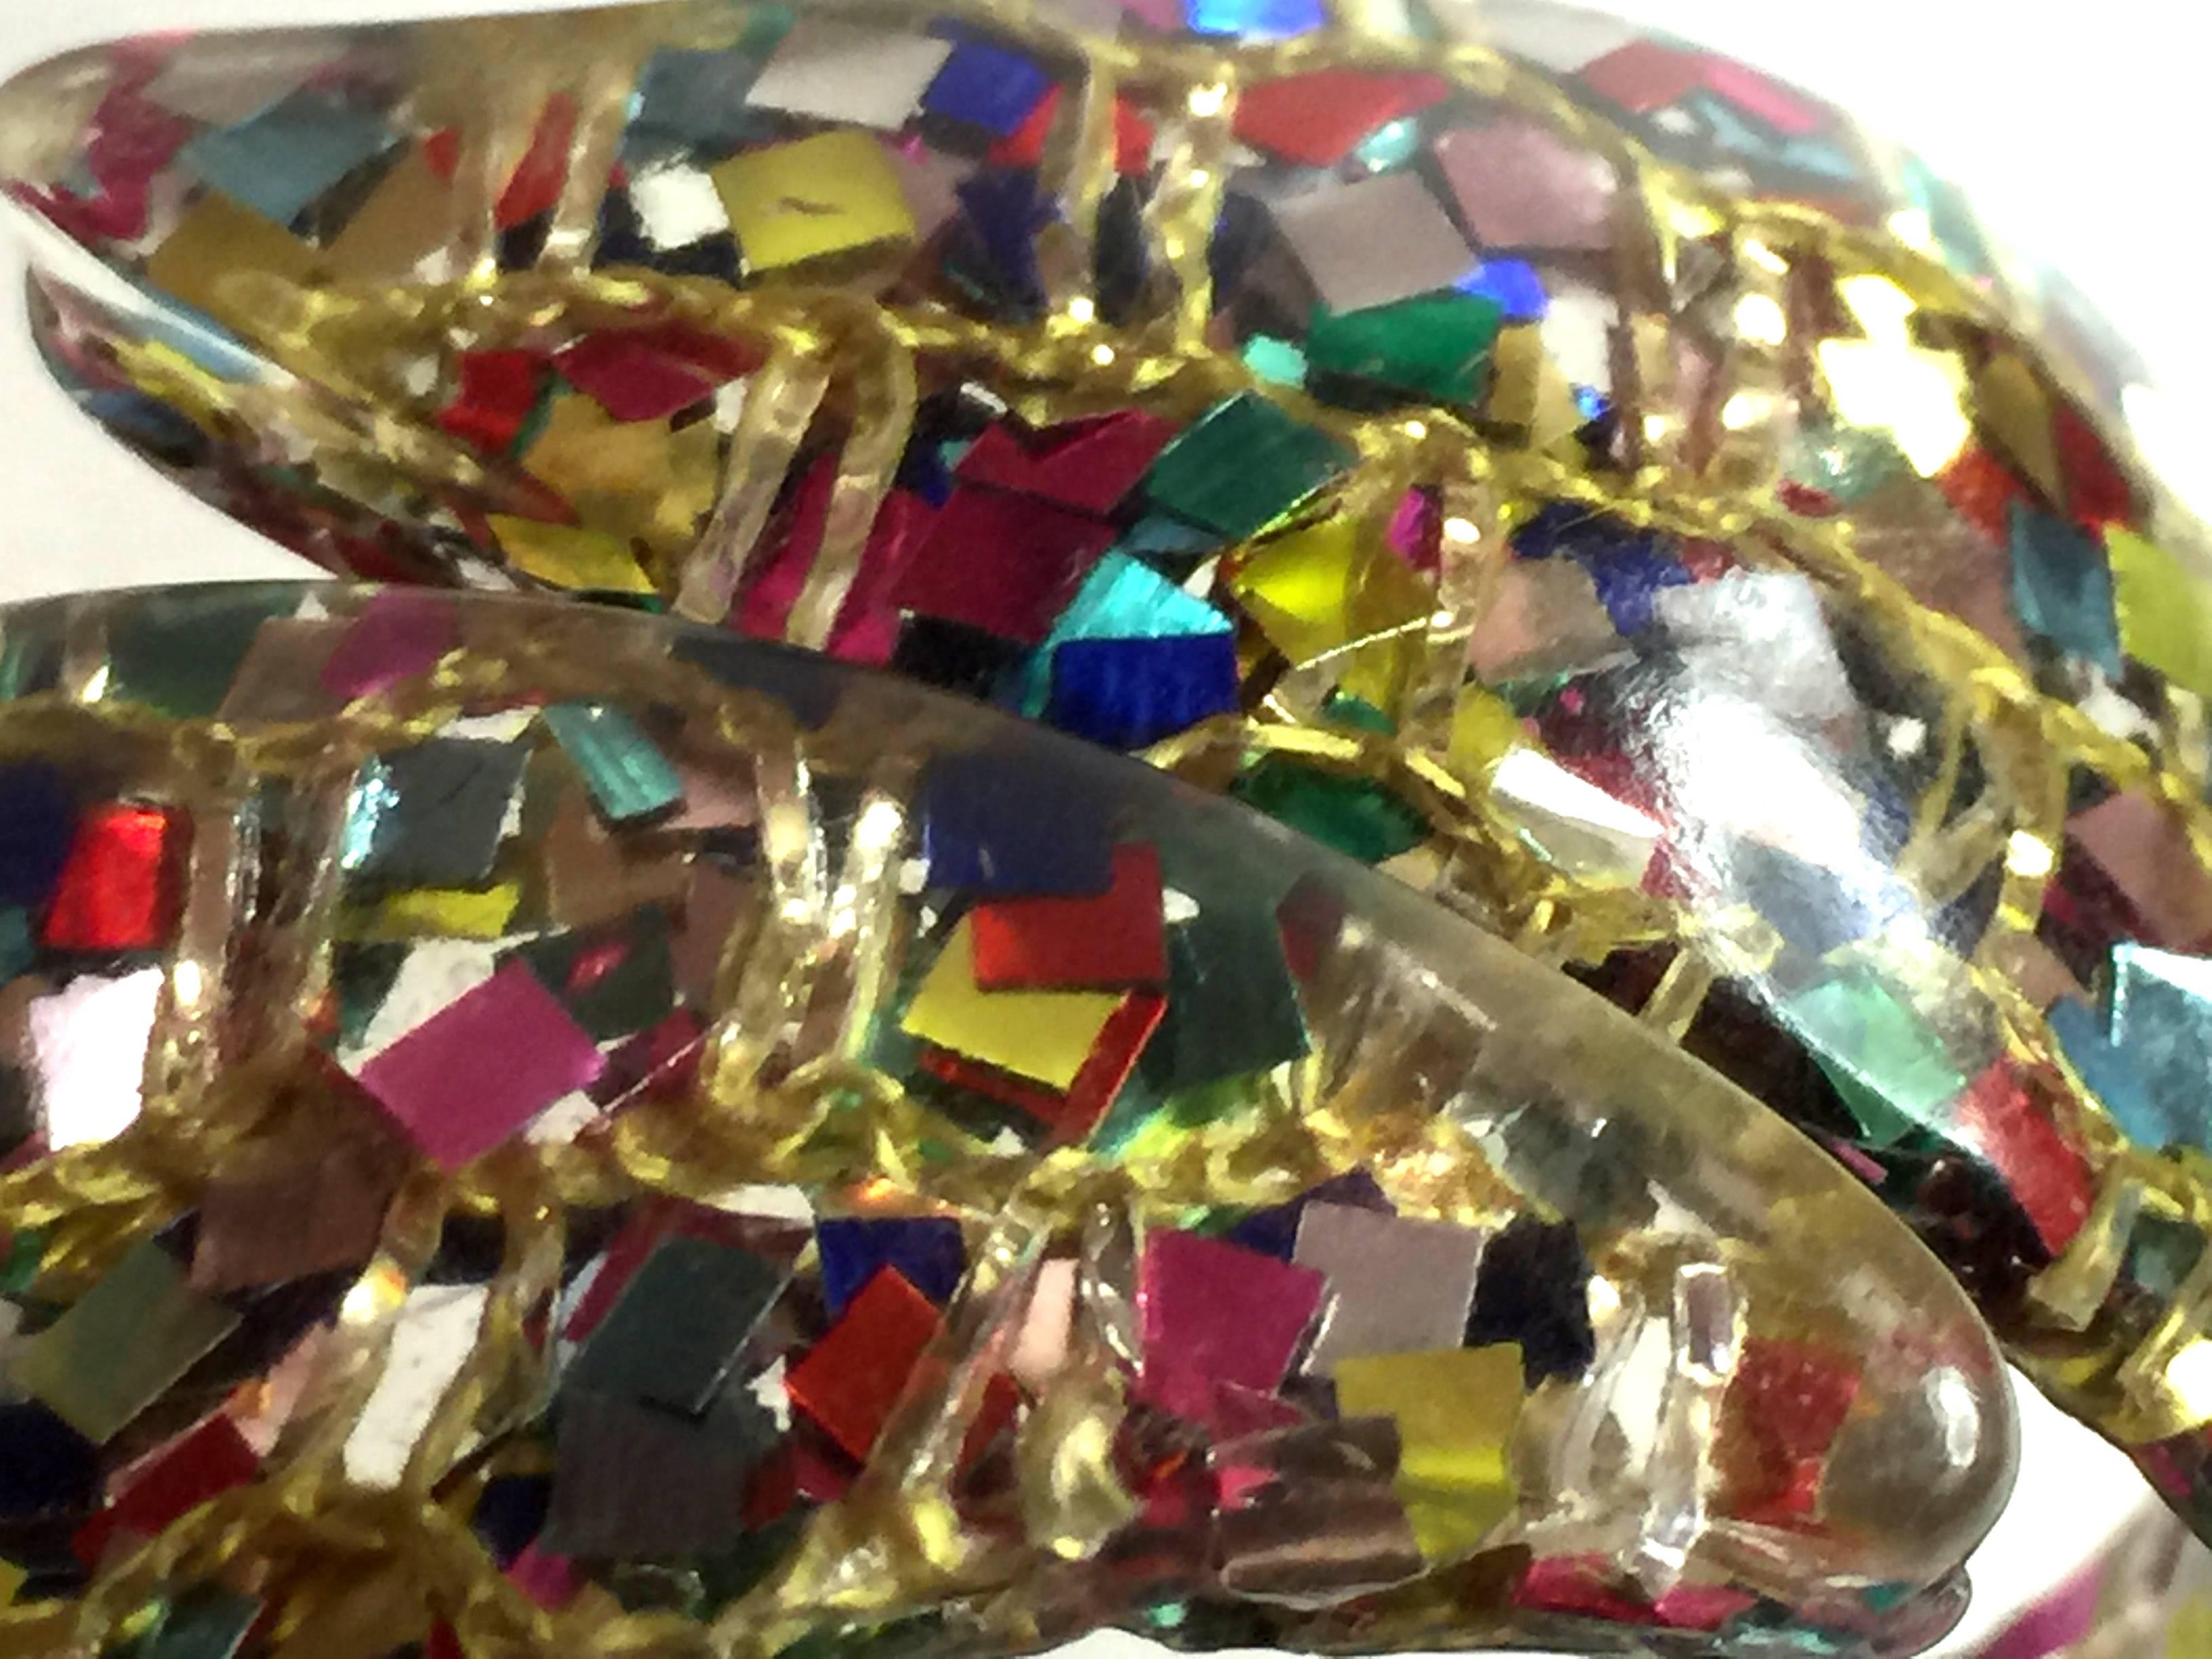 A party on your wrist! Confetti lucite, a thermoset plastic from the 1950s era was used for many kinds of jewelry and purses in the period. This hinged bracelet incorporates the fun and pizazz of multicolored foil confetti flakes in differing shapes